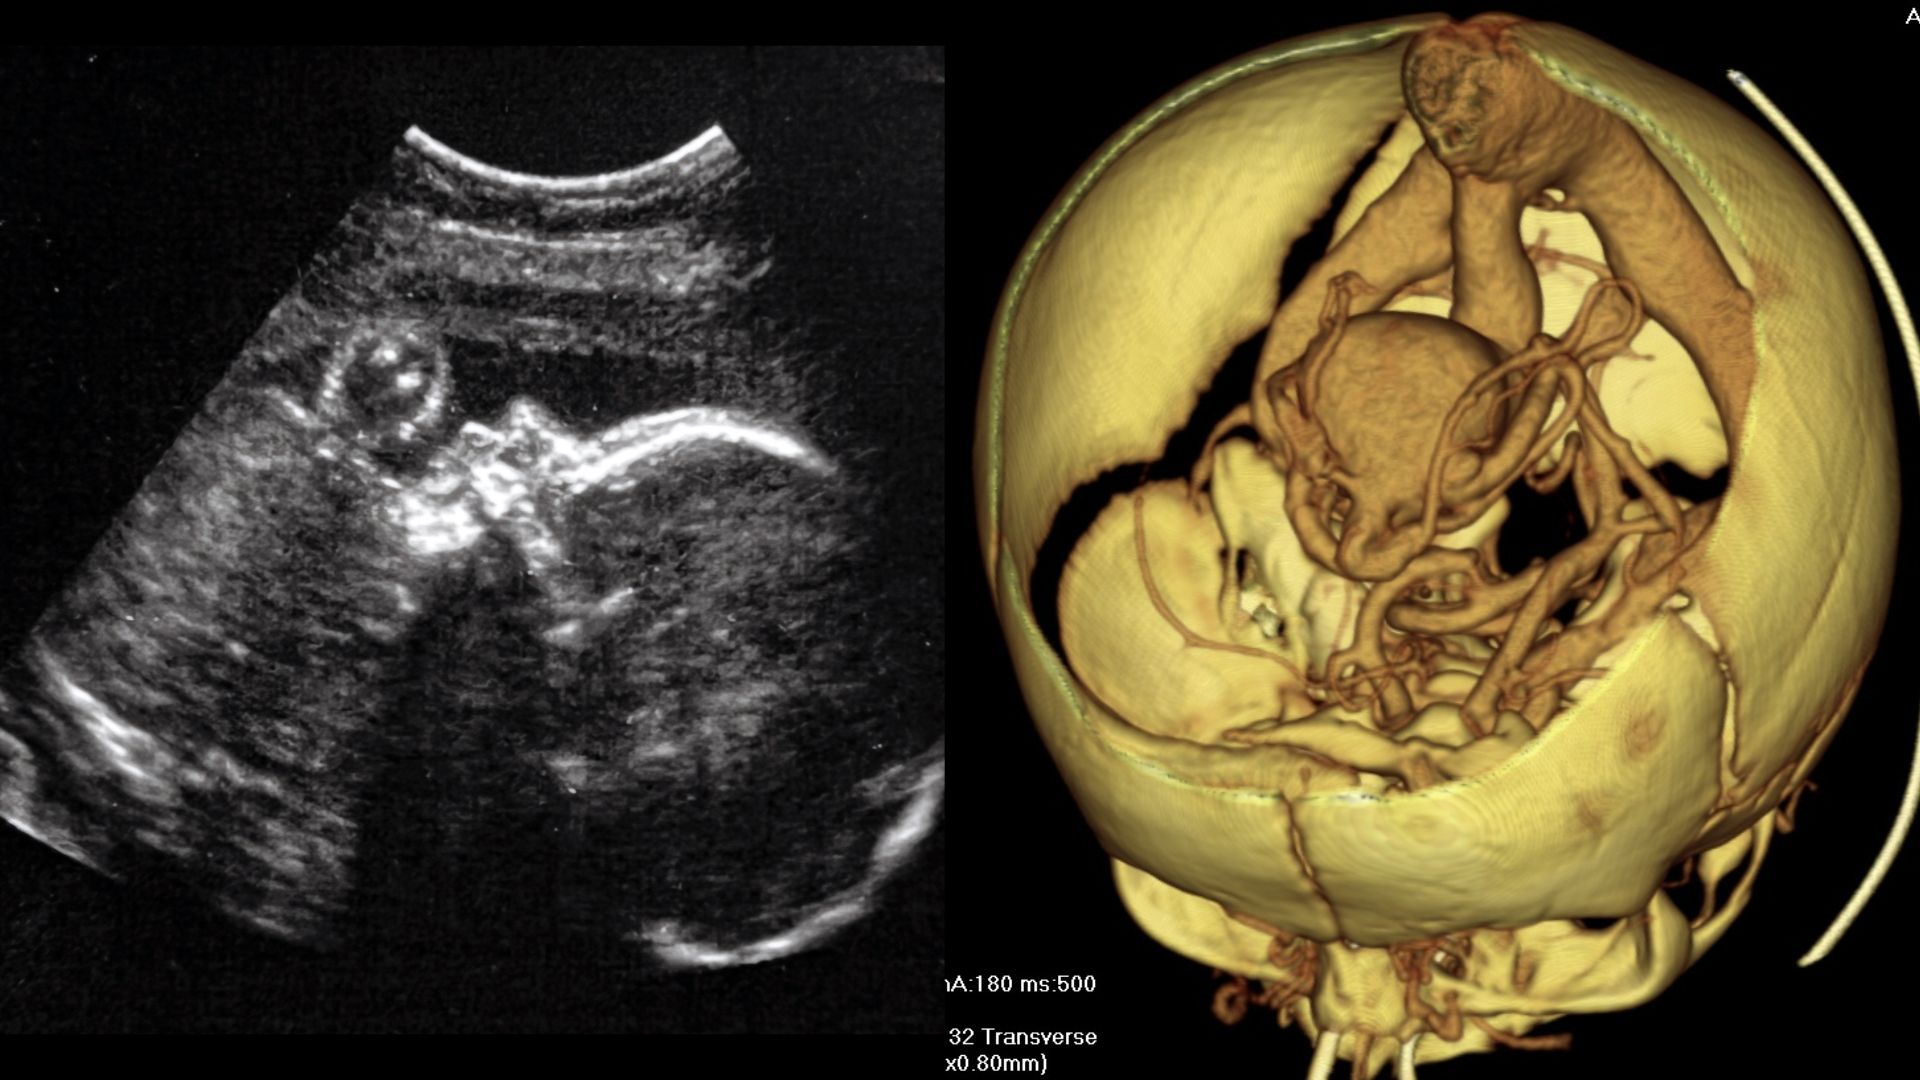 Two images shown side by side. Left image shows an Ultrasound of a healthy baby in-utero. Right image shows a 3D diagram of blood vessels in a human baby's brain, showing a malformation known as the a "vein of Galen malformation'